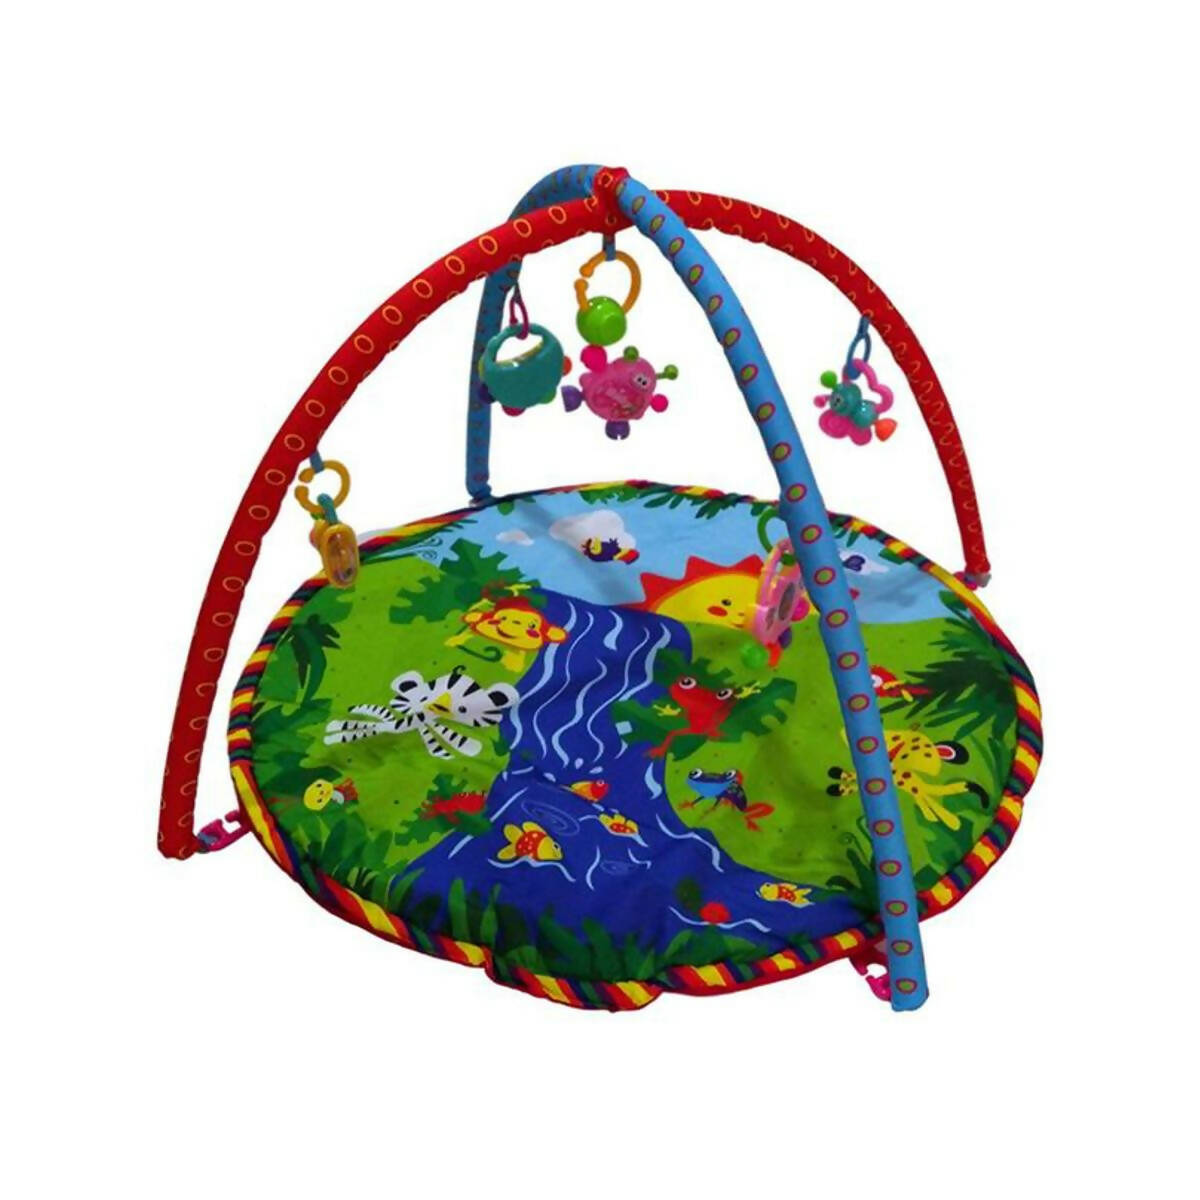 Baby Cloth Play Gym for Kids - Jungle Theme - 30 inches